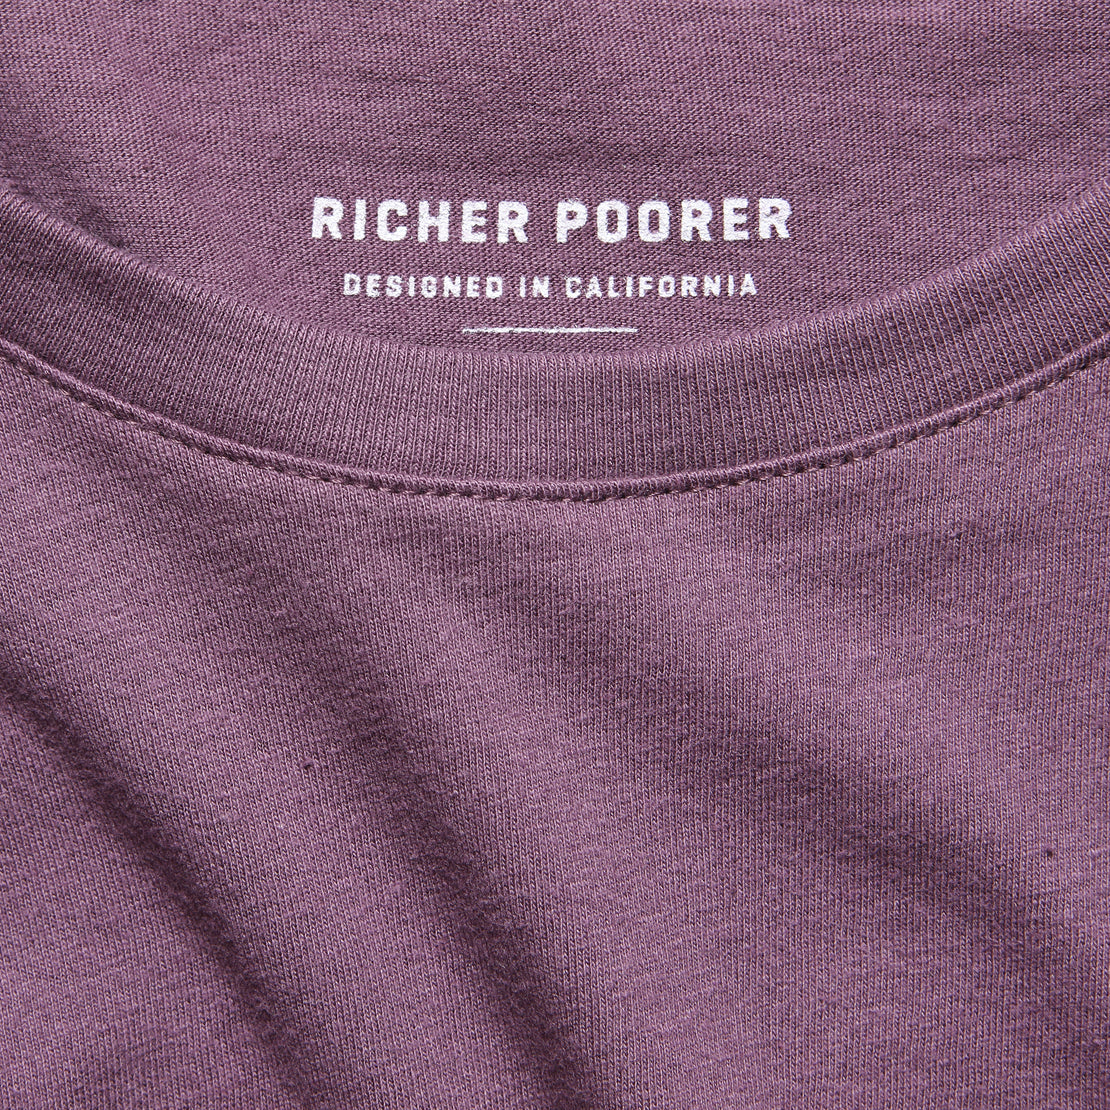 Boxy Crop Tee - Plum - Richer Poorer - STAG Provisions - W - Tops - S/S Tee